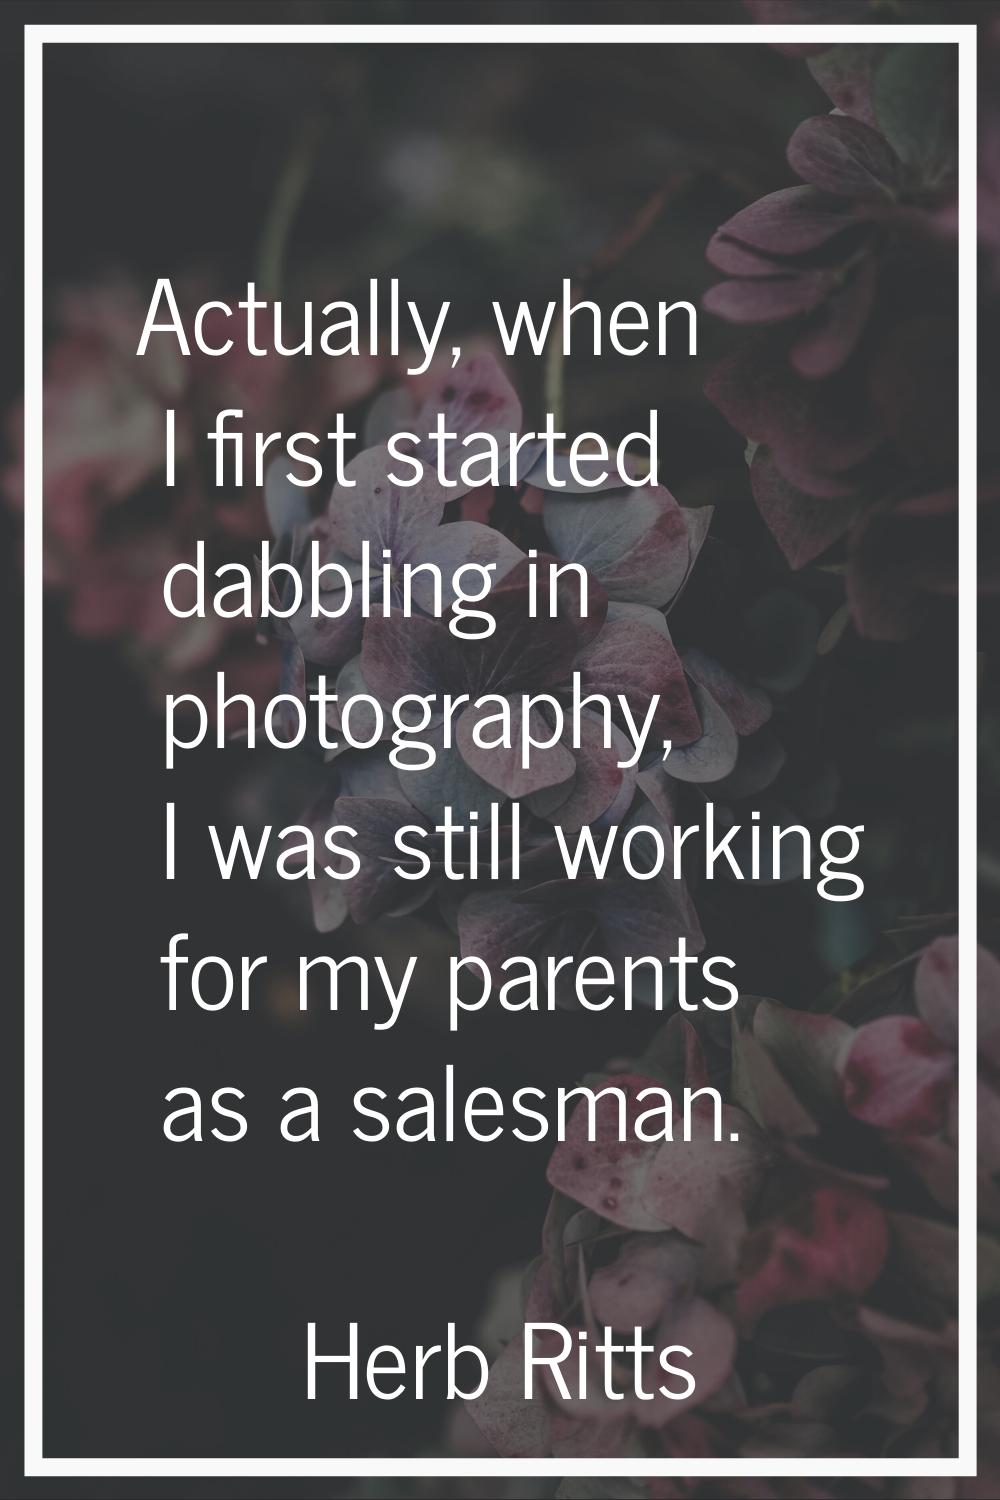 Actually, when I first started dabbling in photography, I was still working for my parents as a sal